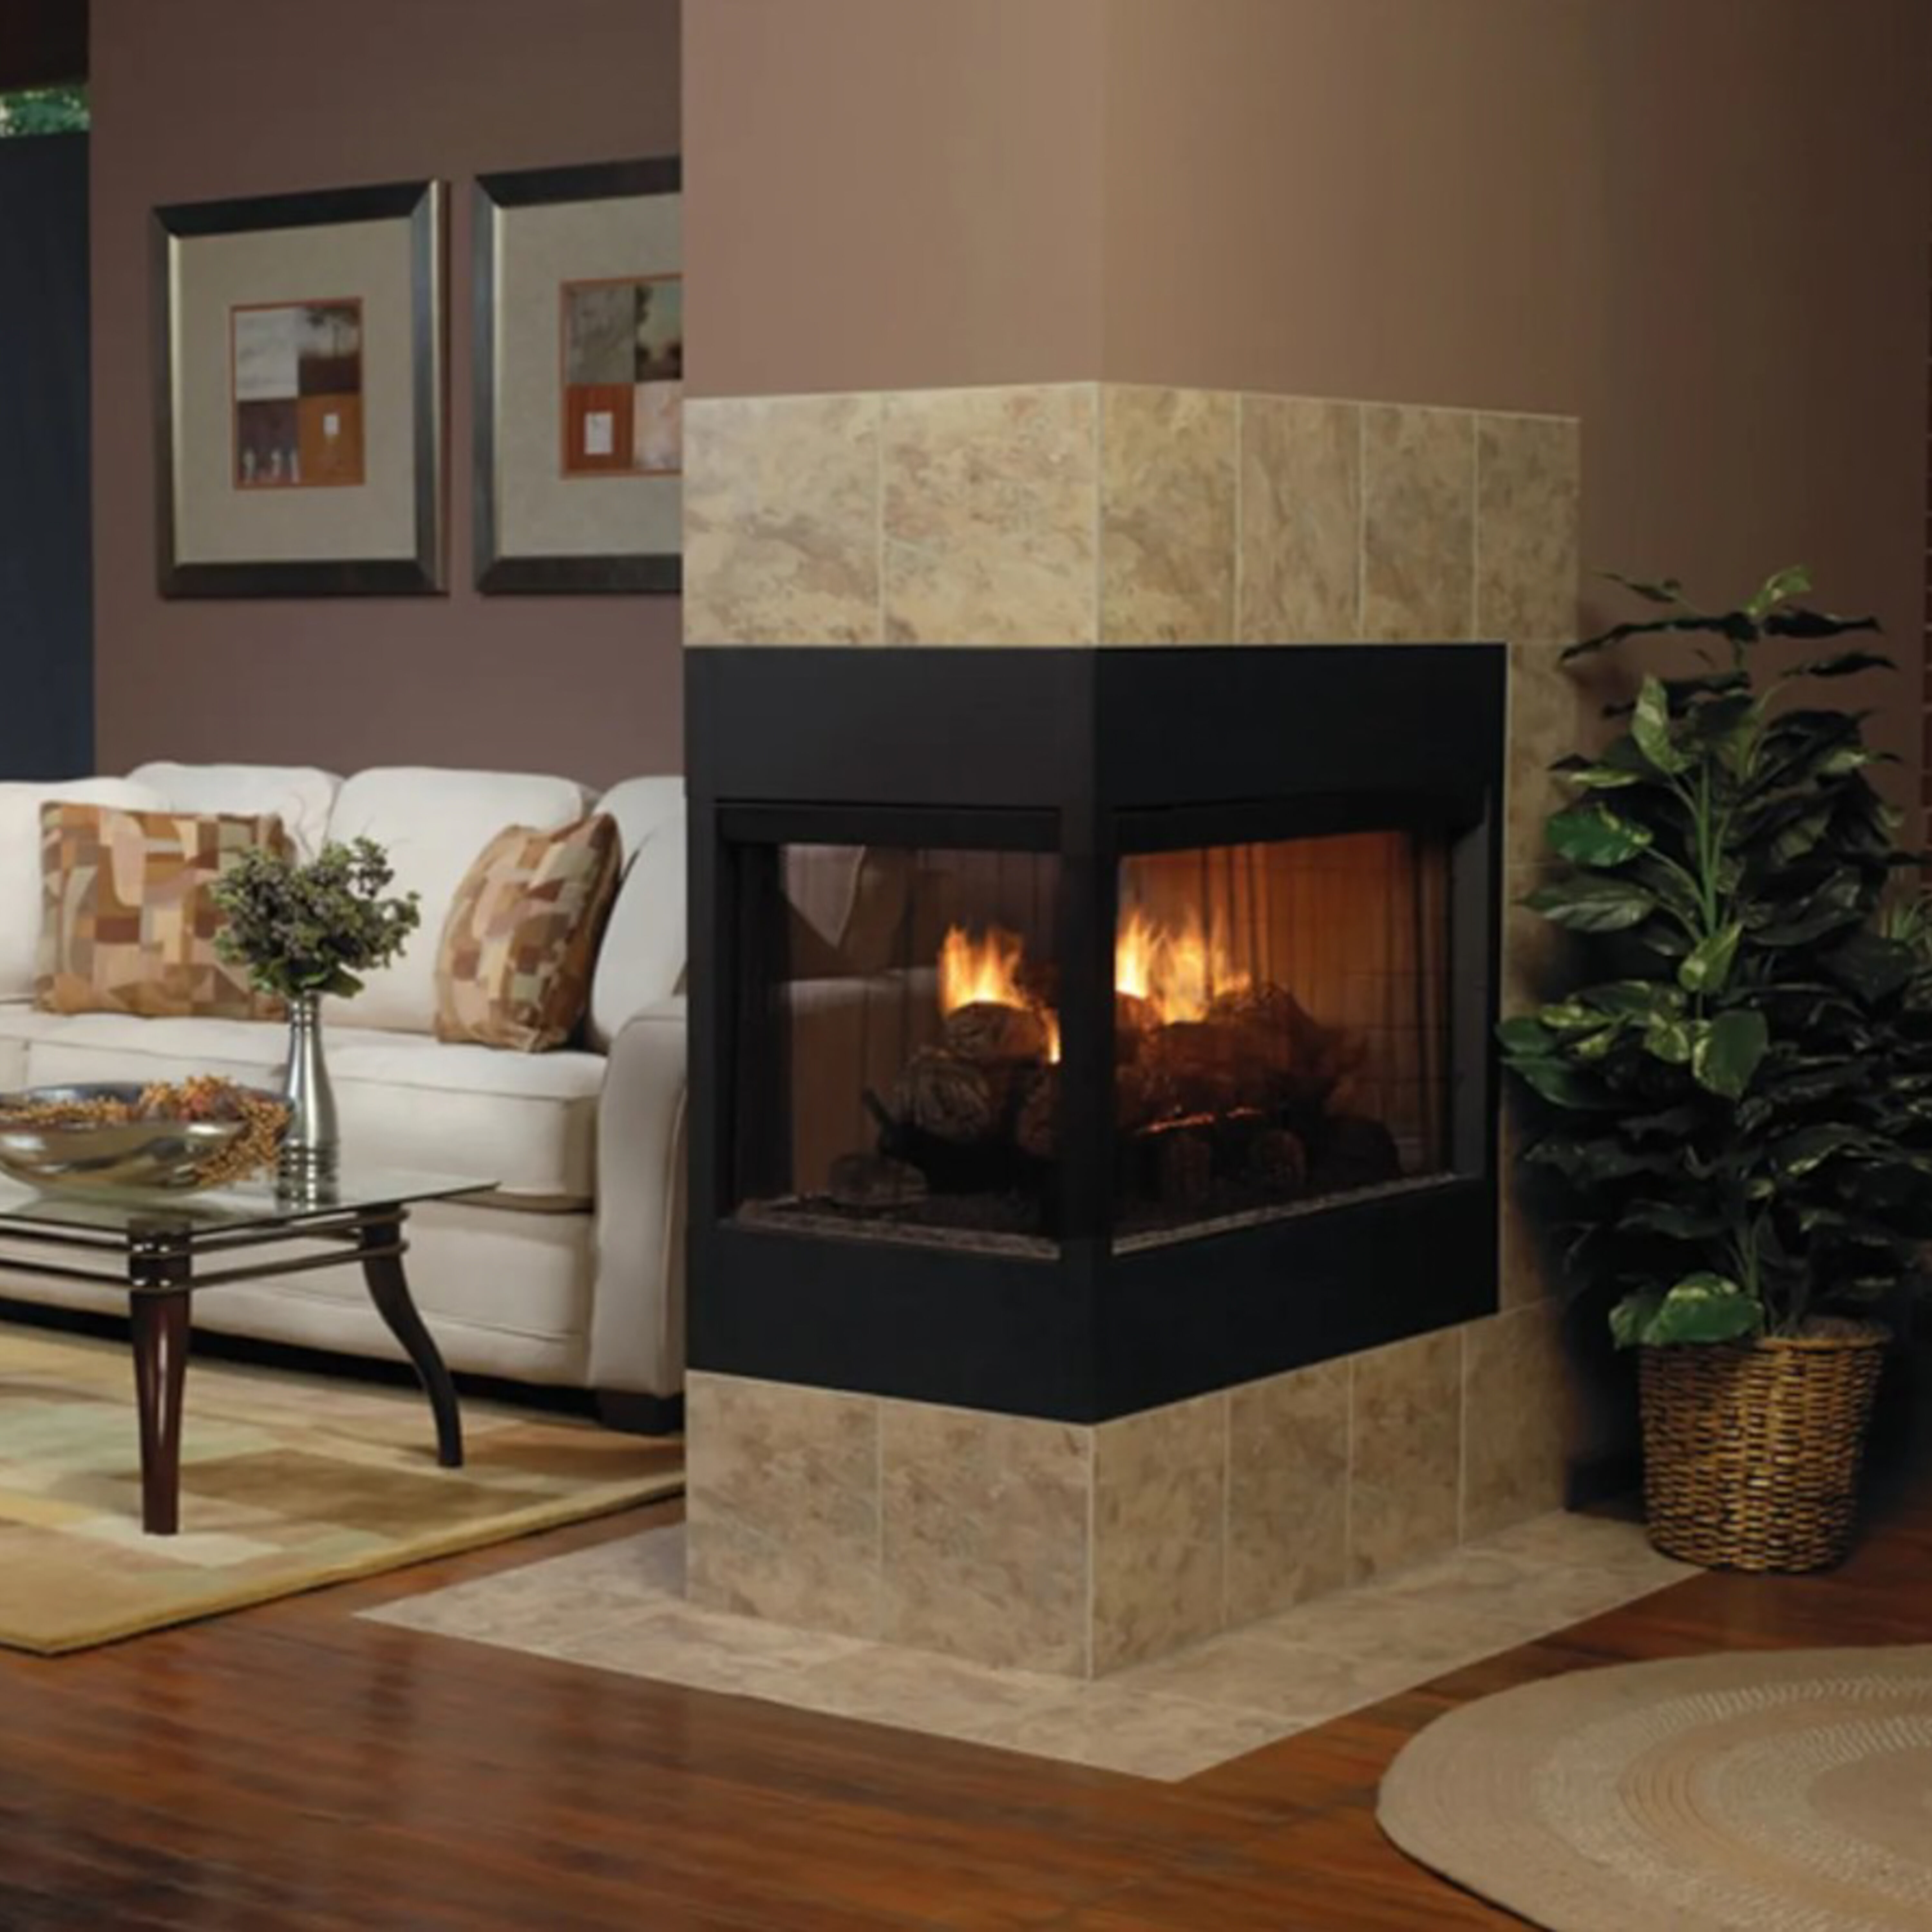 The Empire Stone River See-Through Ventless Gas Log Set is great for any multi-sided Ventless fireplace and features realistic, hand-painted bark details for a natural burning display  